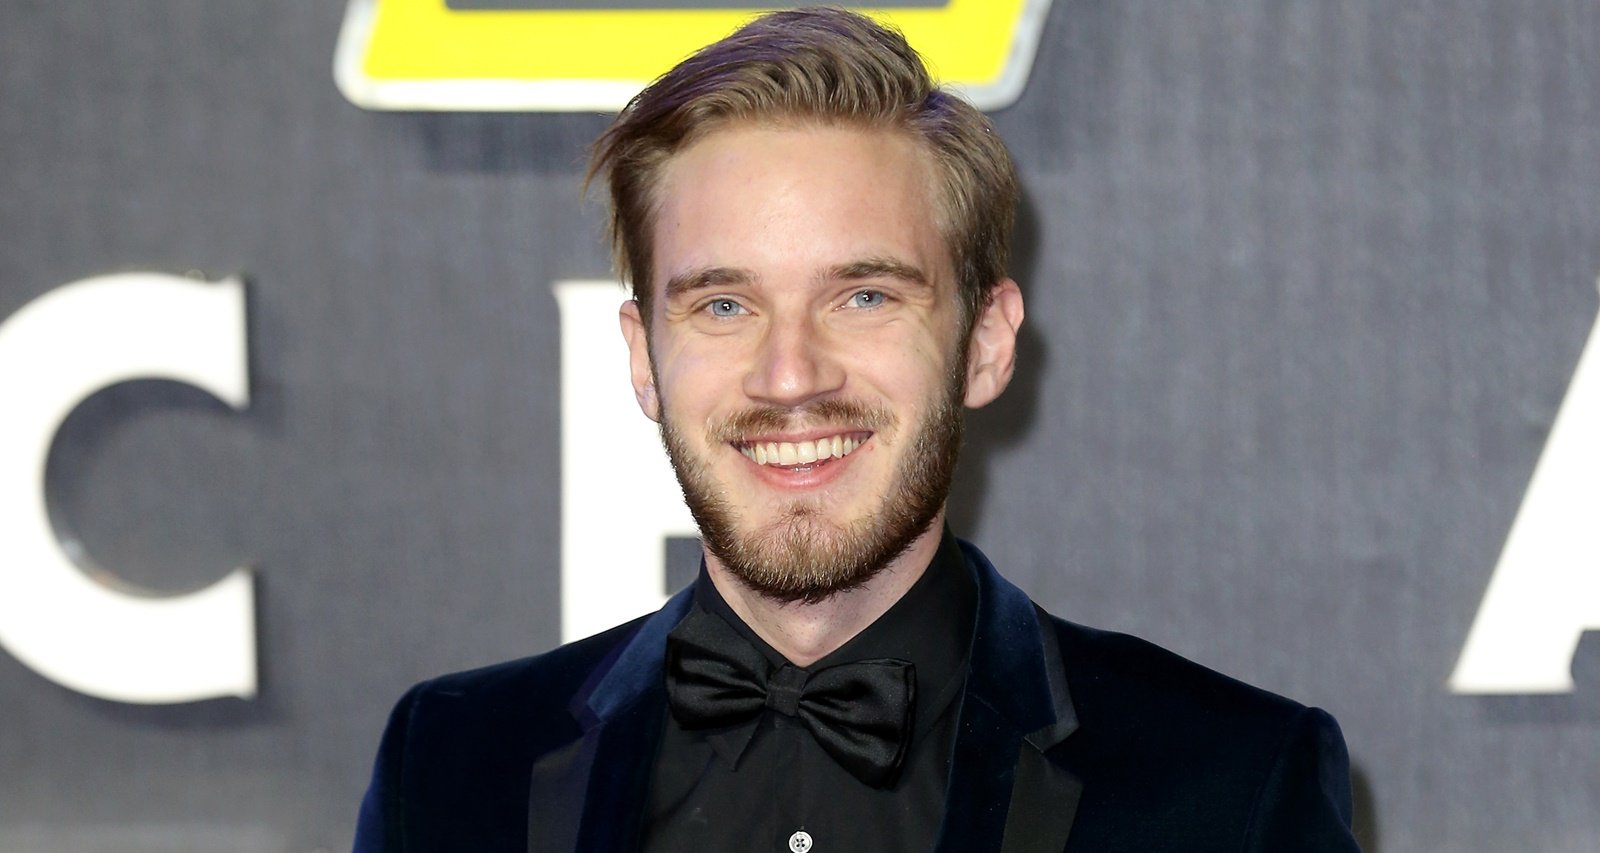 Did Pewdiepie Get Married To Marzia? Here’s What We Know